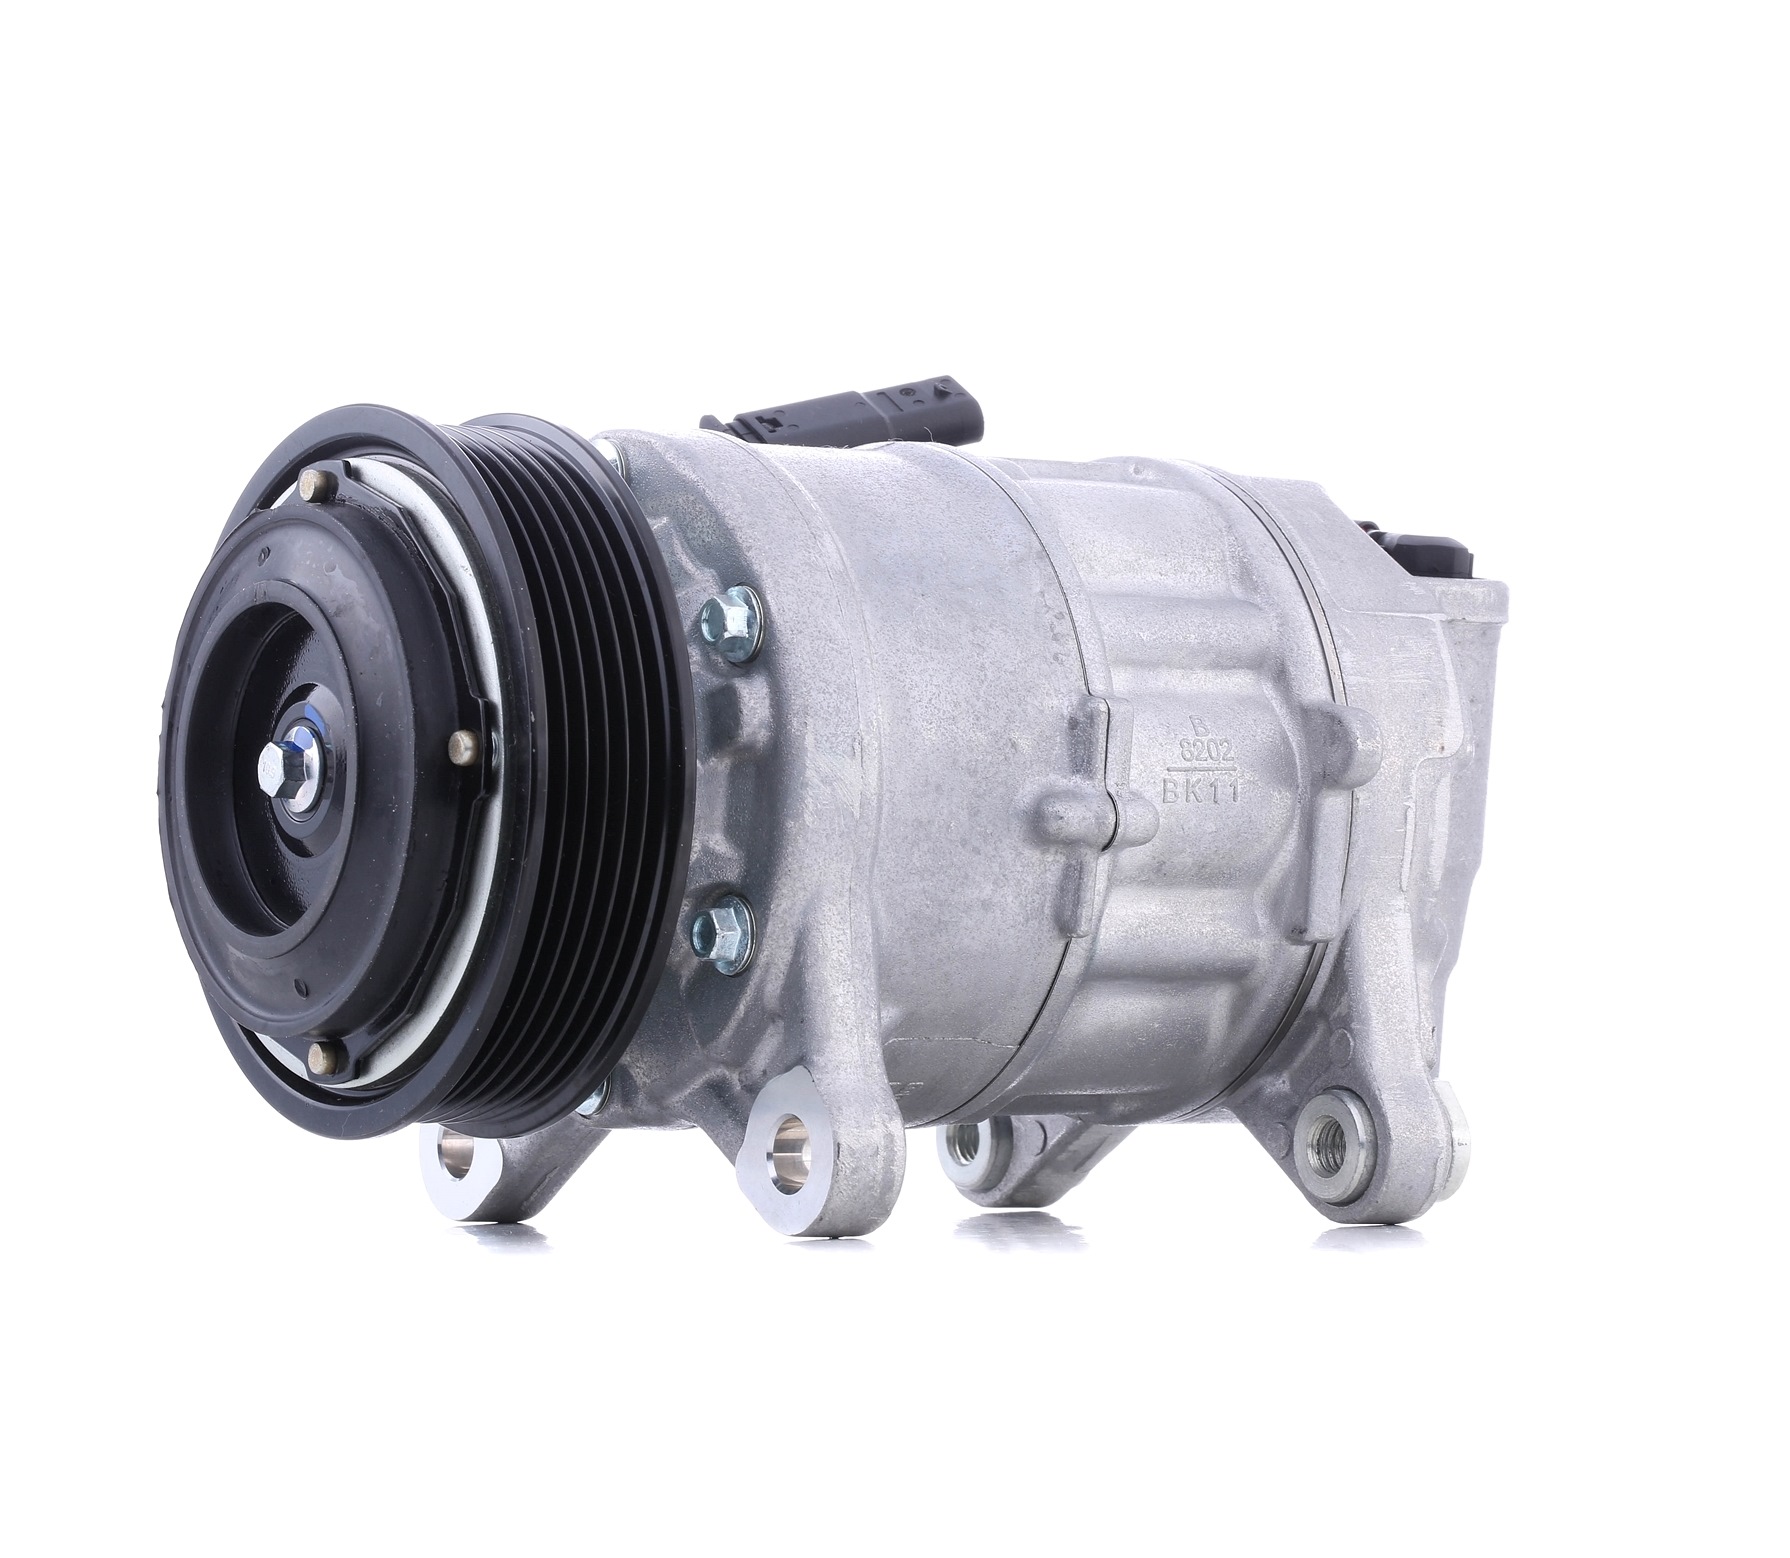 RIDEX 447K0439 Air conditioning compressor VS14, 12V, PAG 46 YF, PAG 46, R 1234yf, R 134a, with magnetic clutch, with seal ring